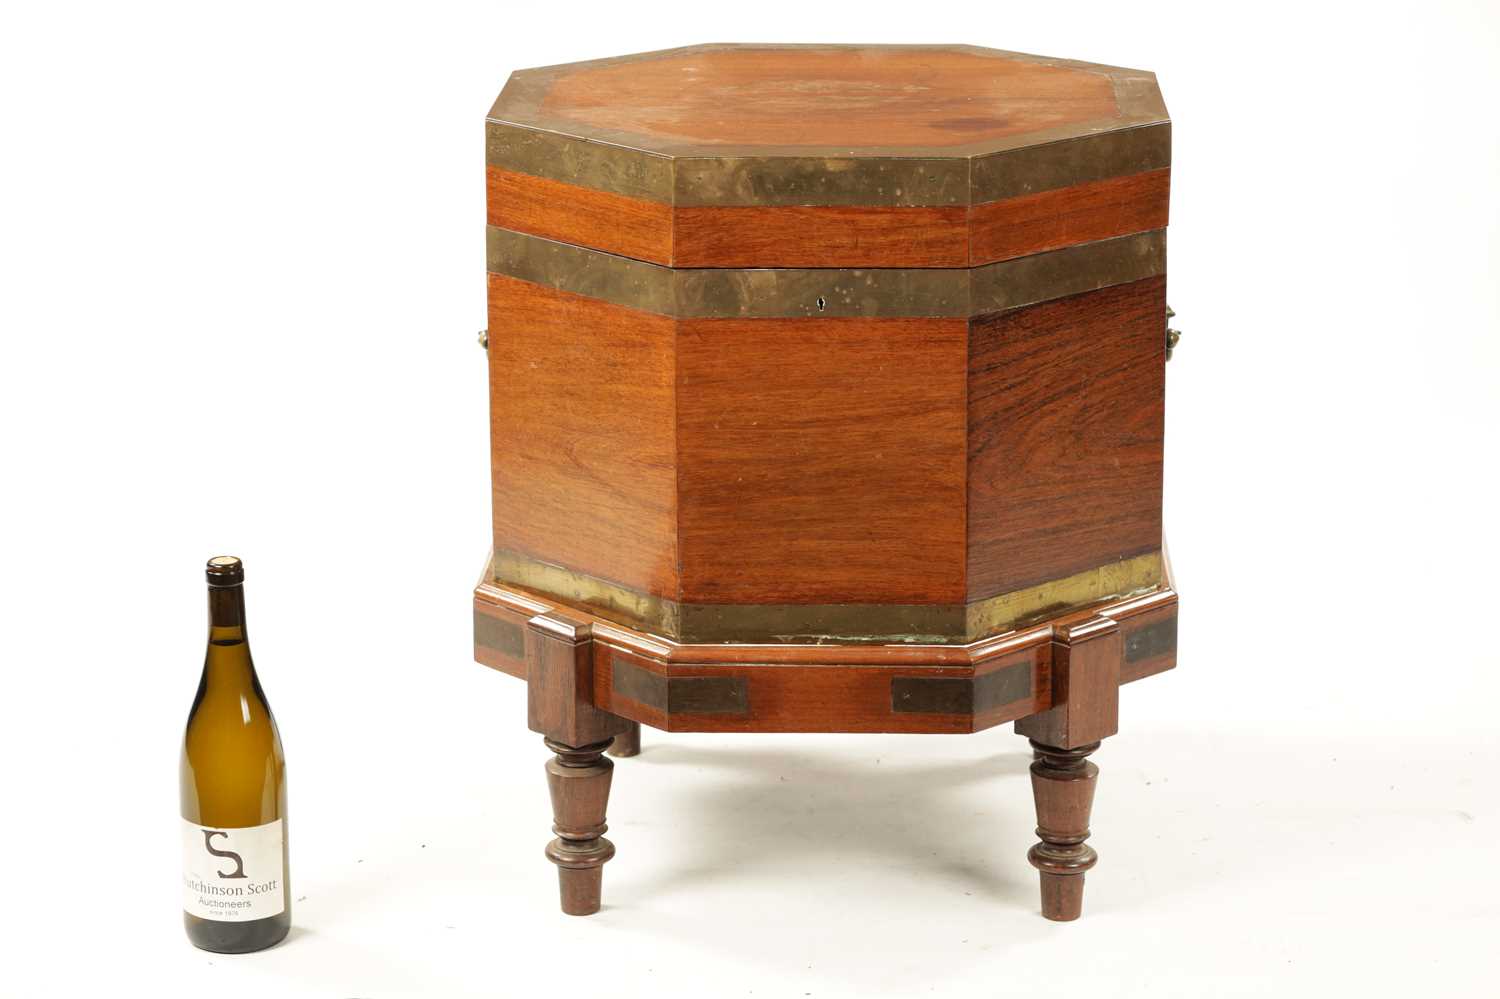 AN UNUSUAL 18TH CENTURY COLONIAL PADOUK OCTAGONAL SHAPED WINE COOLER ON STAND - Image 2 of 7